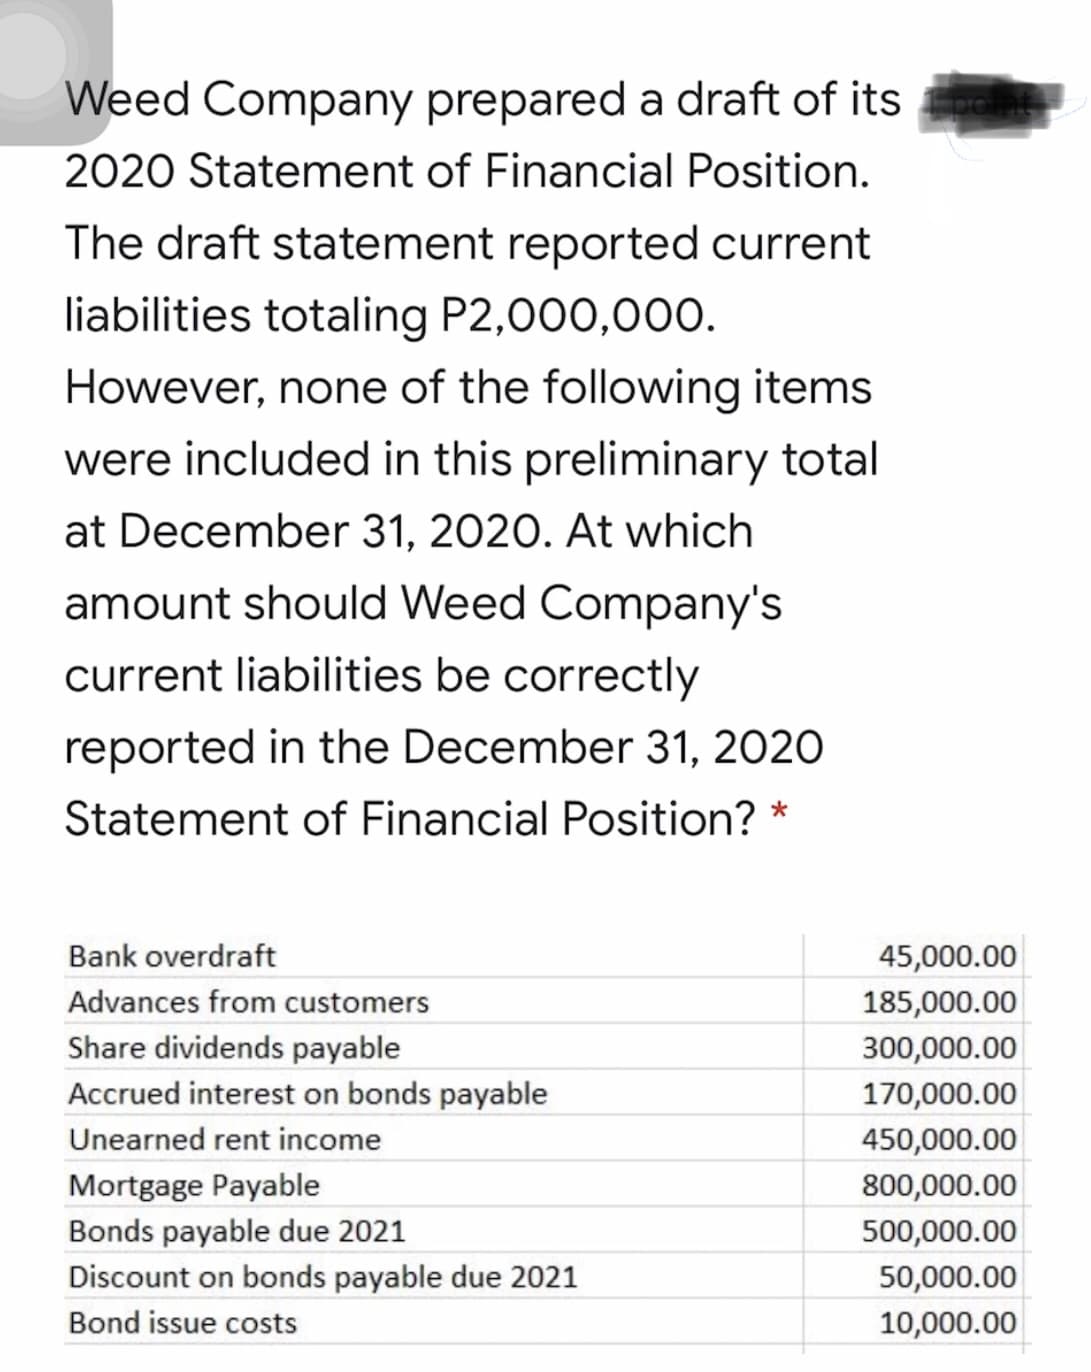 Weed Company prepared a draft of its
2020 Statement of Financial Position.
The draft statement reported current
liabilities totaling P2,000,00O.
However, none of the following items
were included in this preliminary total
at December 31, 2020. At which
amount should Weed Company's
current liabilities be correctly
reported in the December 31, 2020
Statement of Financial Position?
*
Bank overdraft
45,000.00
Advances from customers
185,000.00
Share dividends payable
Accrued interest on bonds payable
300,000.00
170,000.00
Unearned rent income
450,000.00
Mortgage Payable
800,000.00
Bonds payable due 2021
500,000.00
Discount on bonds payable due 2021
50,000.00
Bond issue costs
10,000.00
